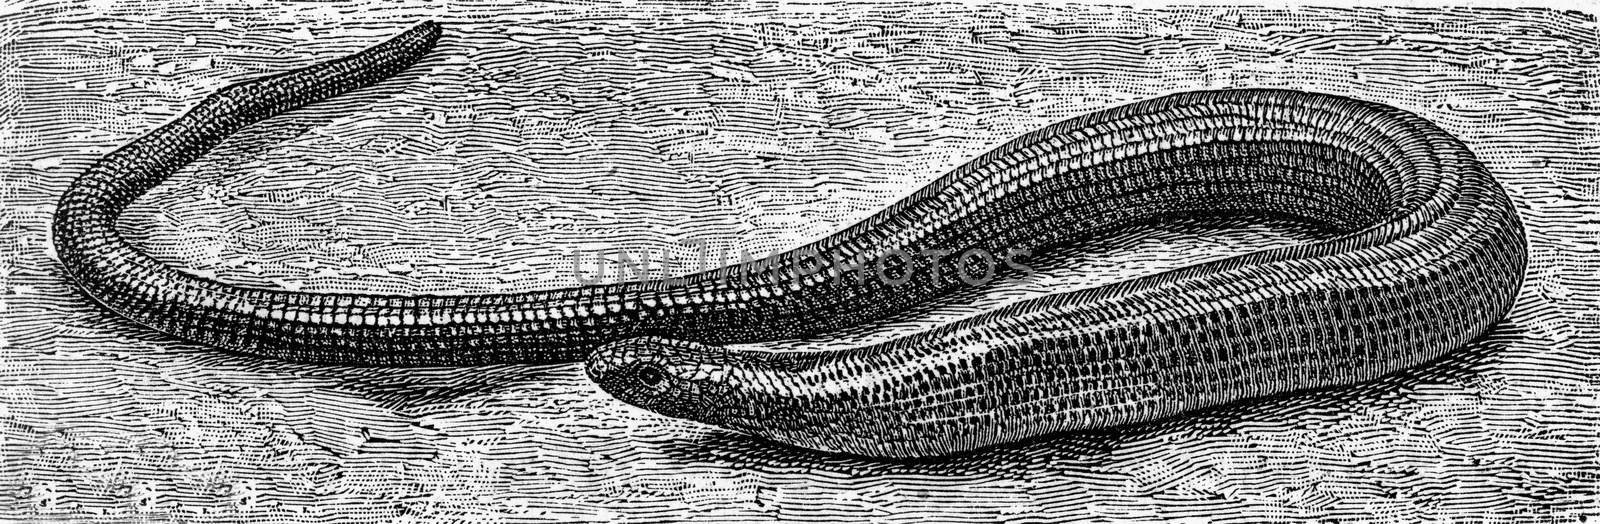 The slow worm, vintage engraved illustration. From Deutch Vogel Teaching in Zoology.
